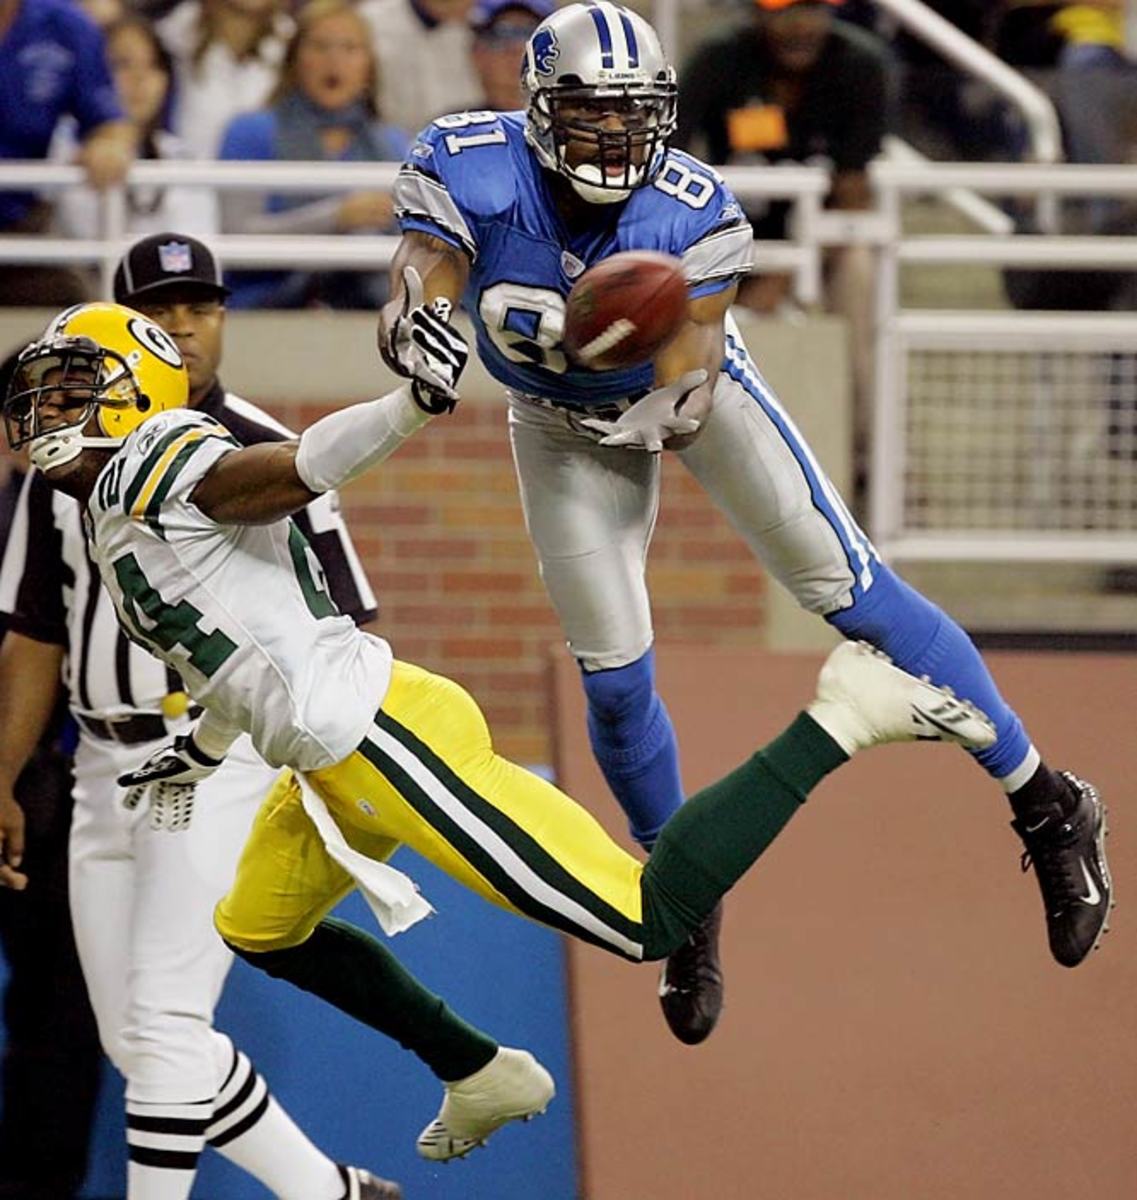 Packers 37, Lions 26